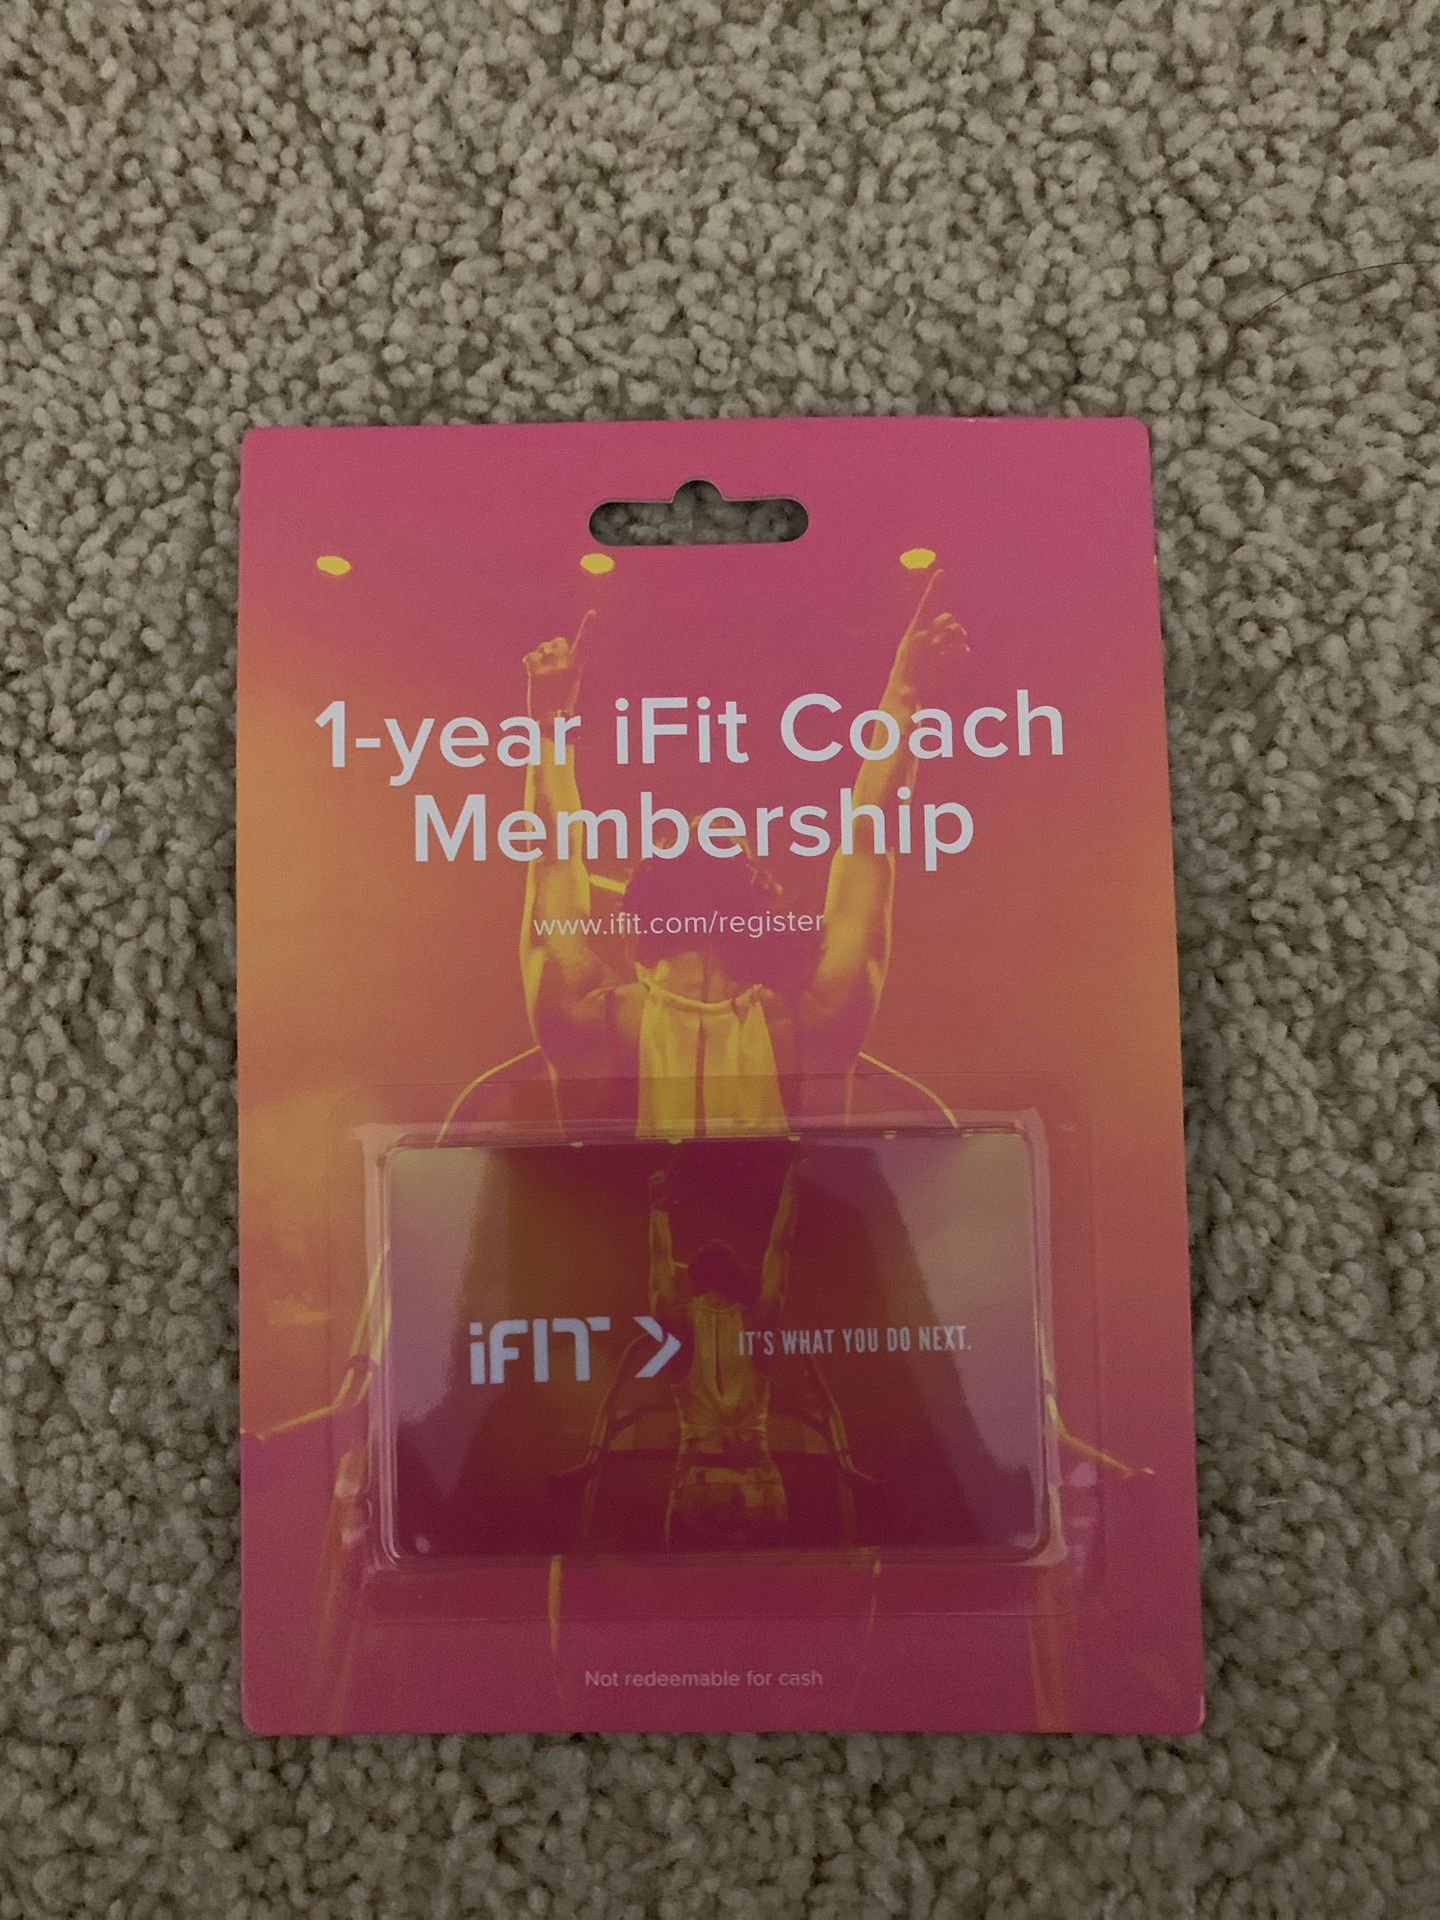 iFit coach membership card valid for 1 year